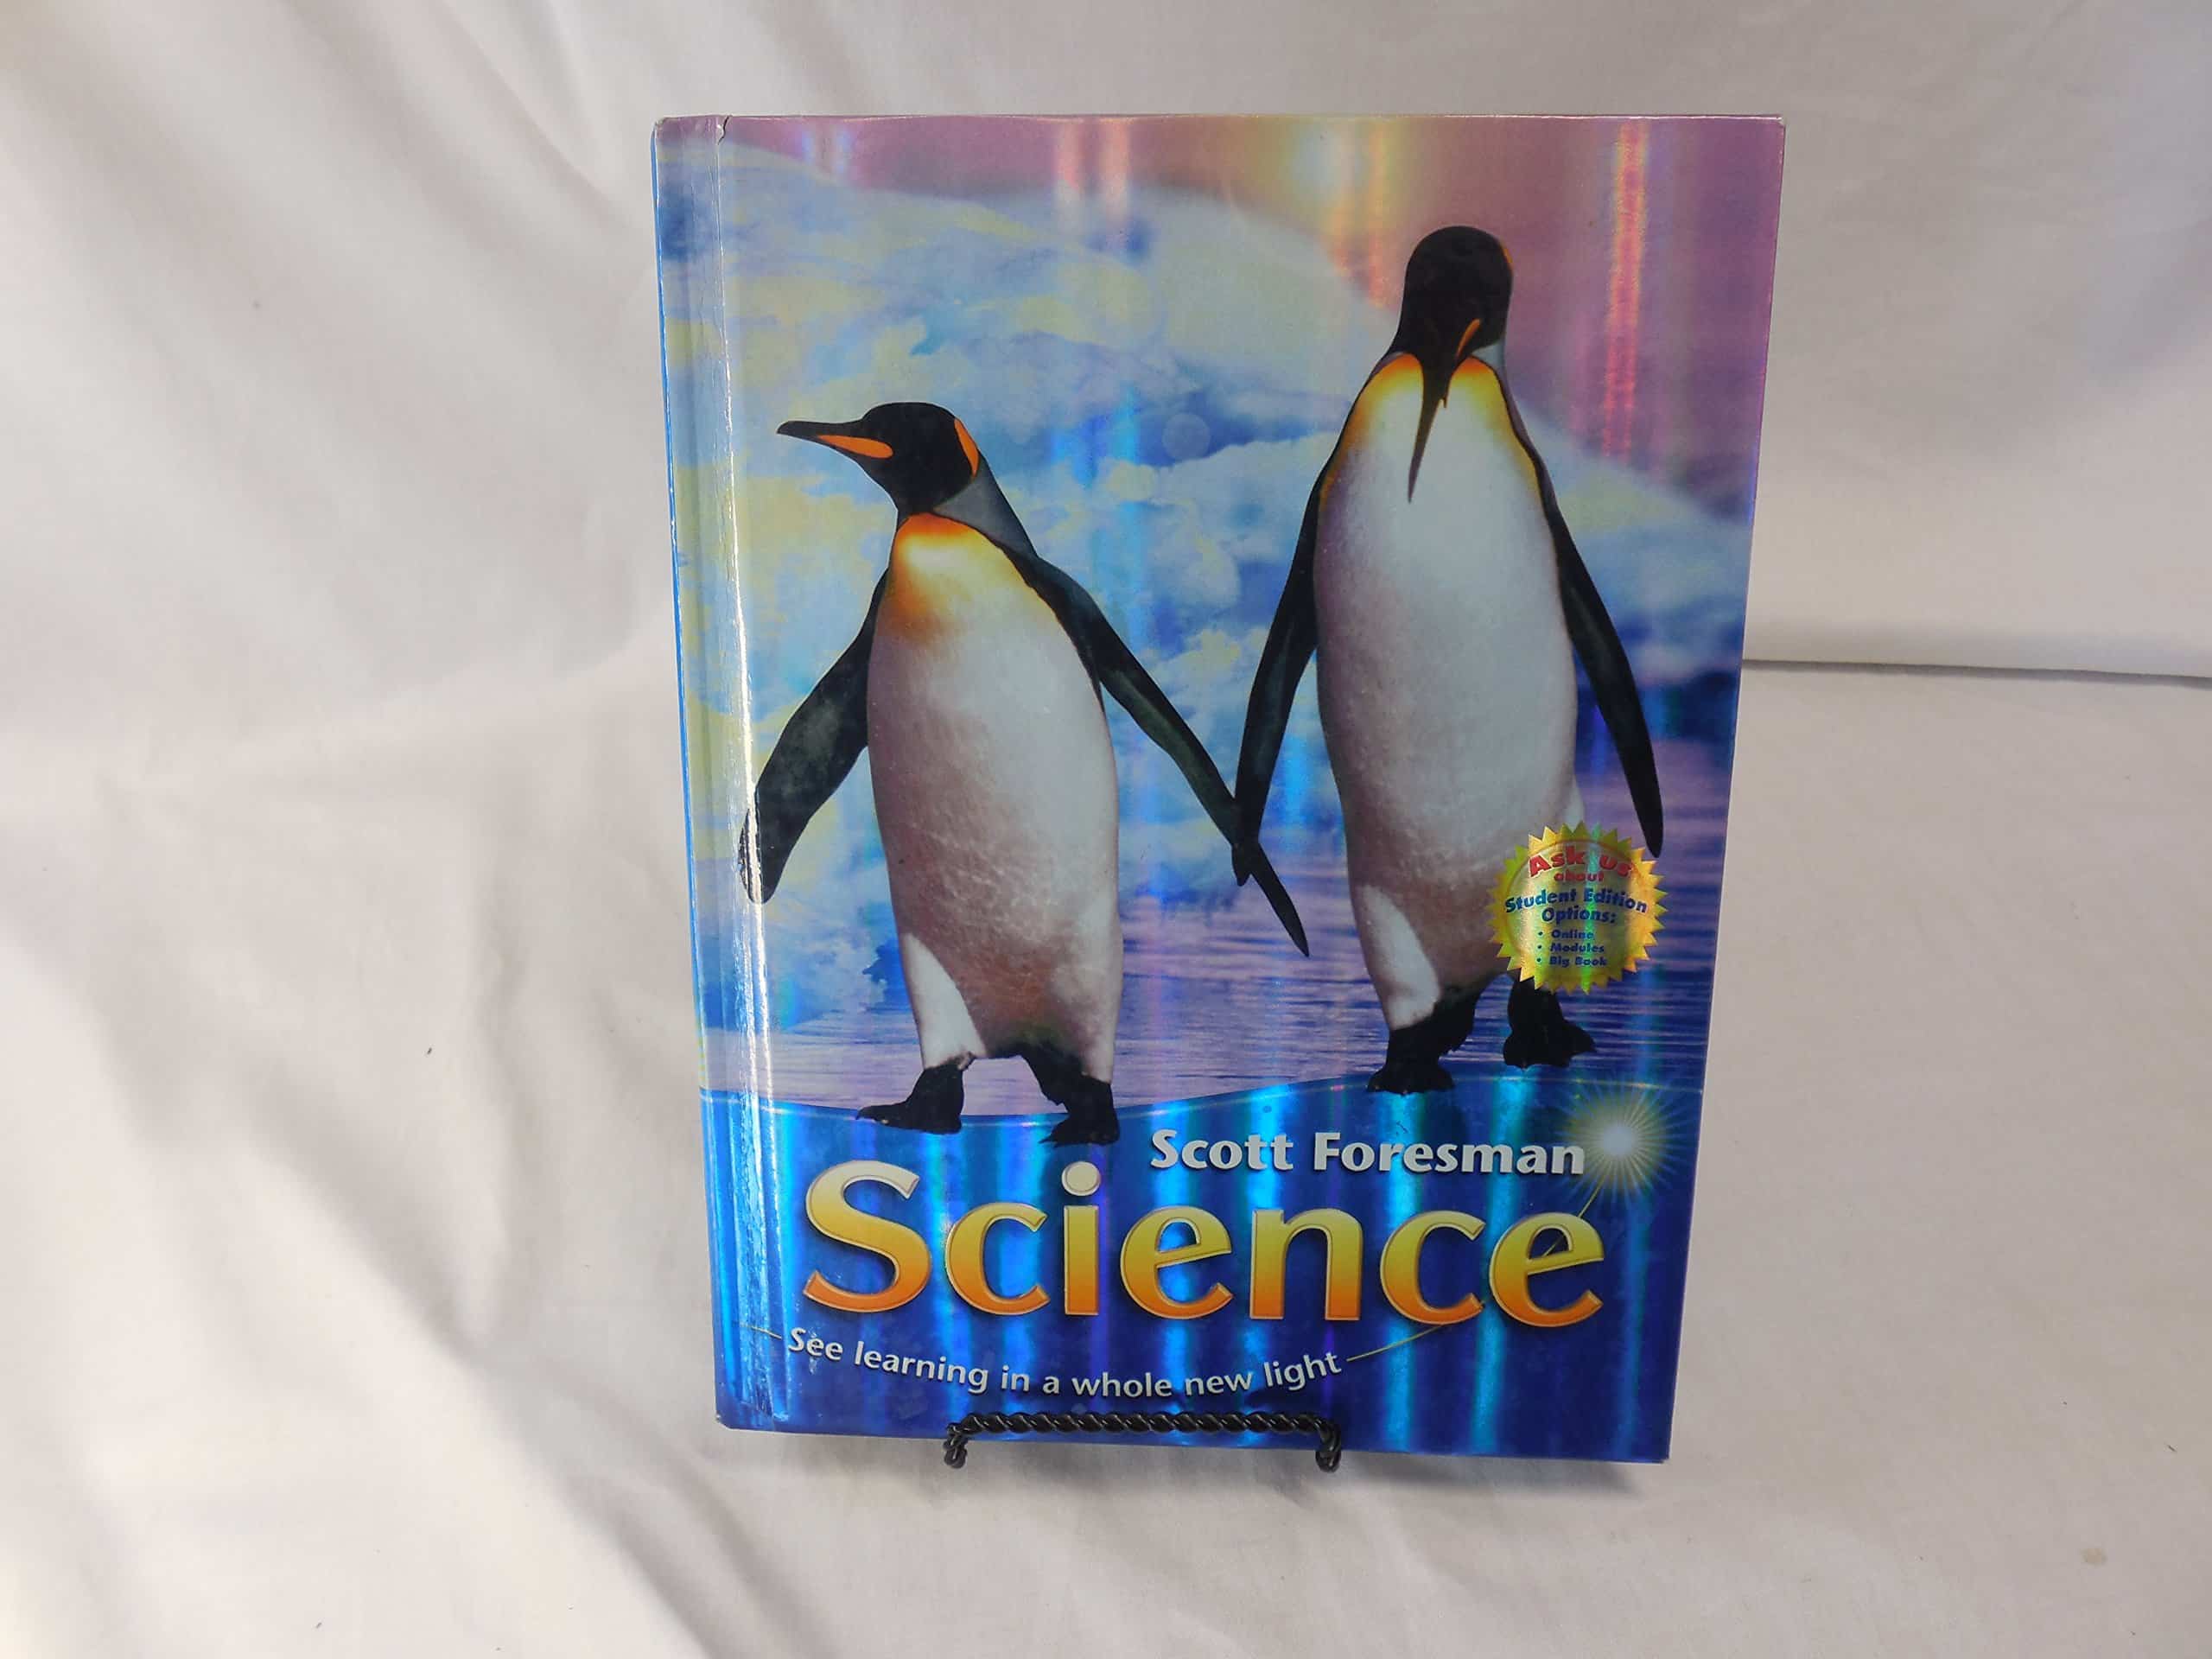 PUPIL　Alefredo　VOLUME　EDITION　SINGLE　Light)　Books　(See　2006　Whole　in　a　New　GRADE　EDITION　SCIENCE　Learning